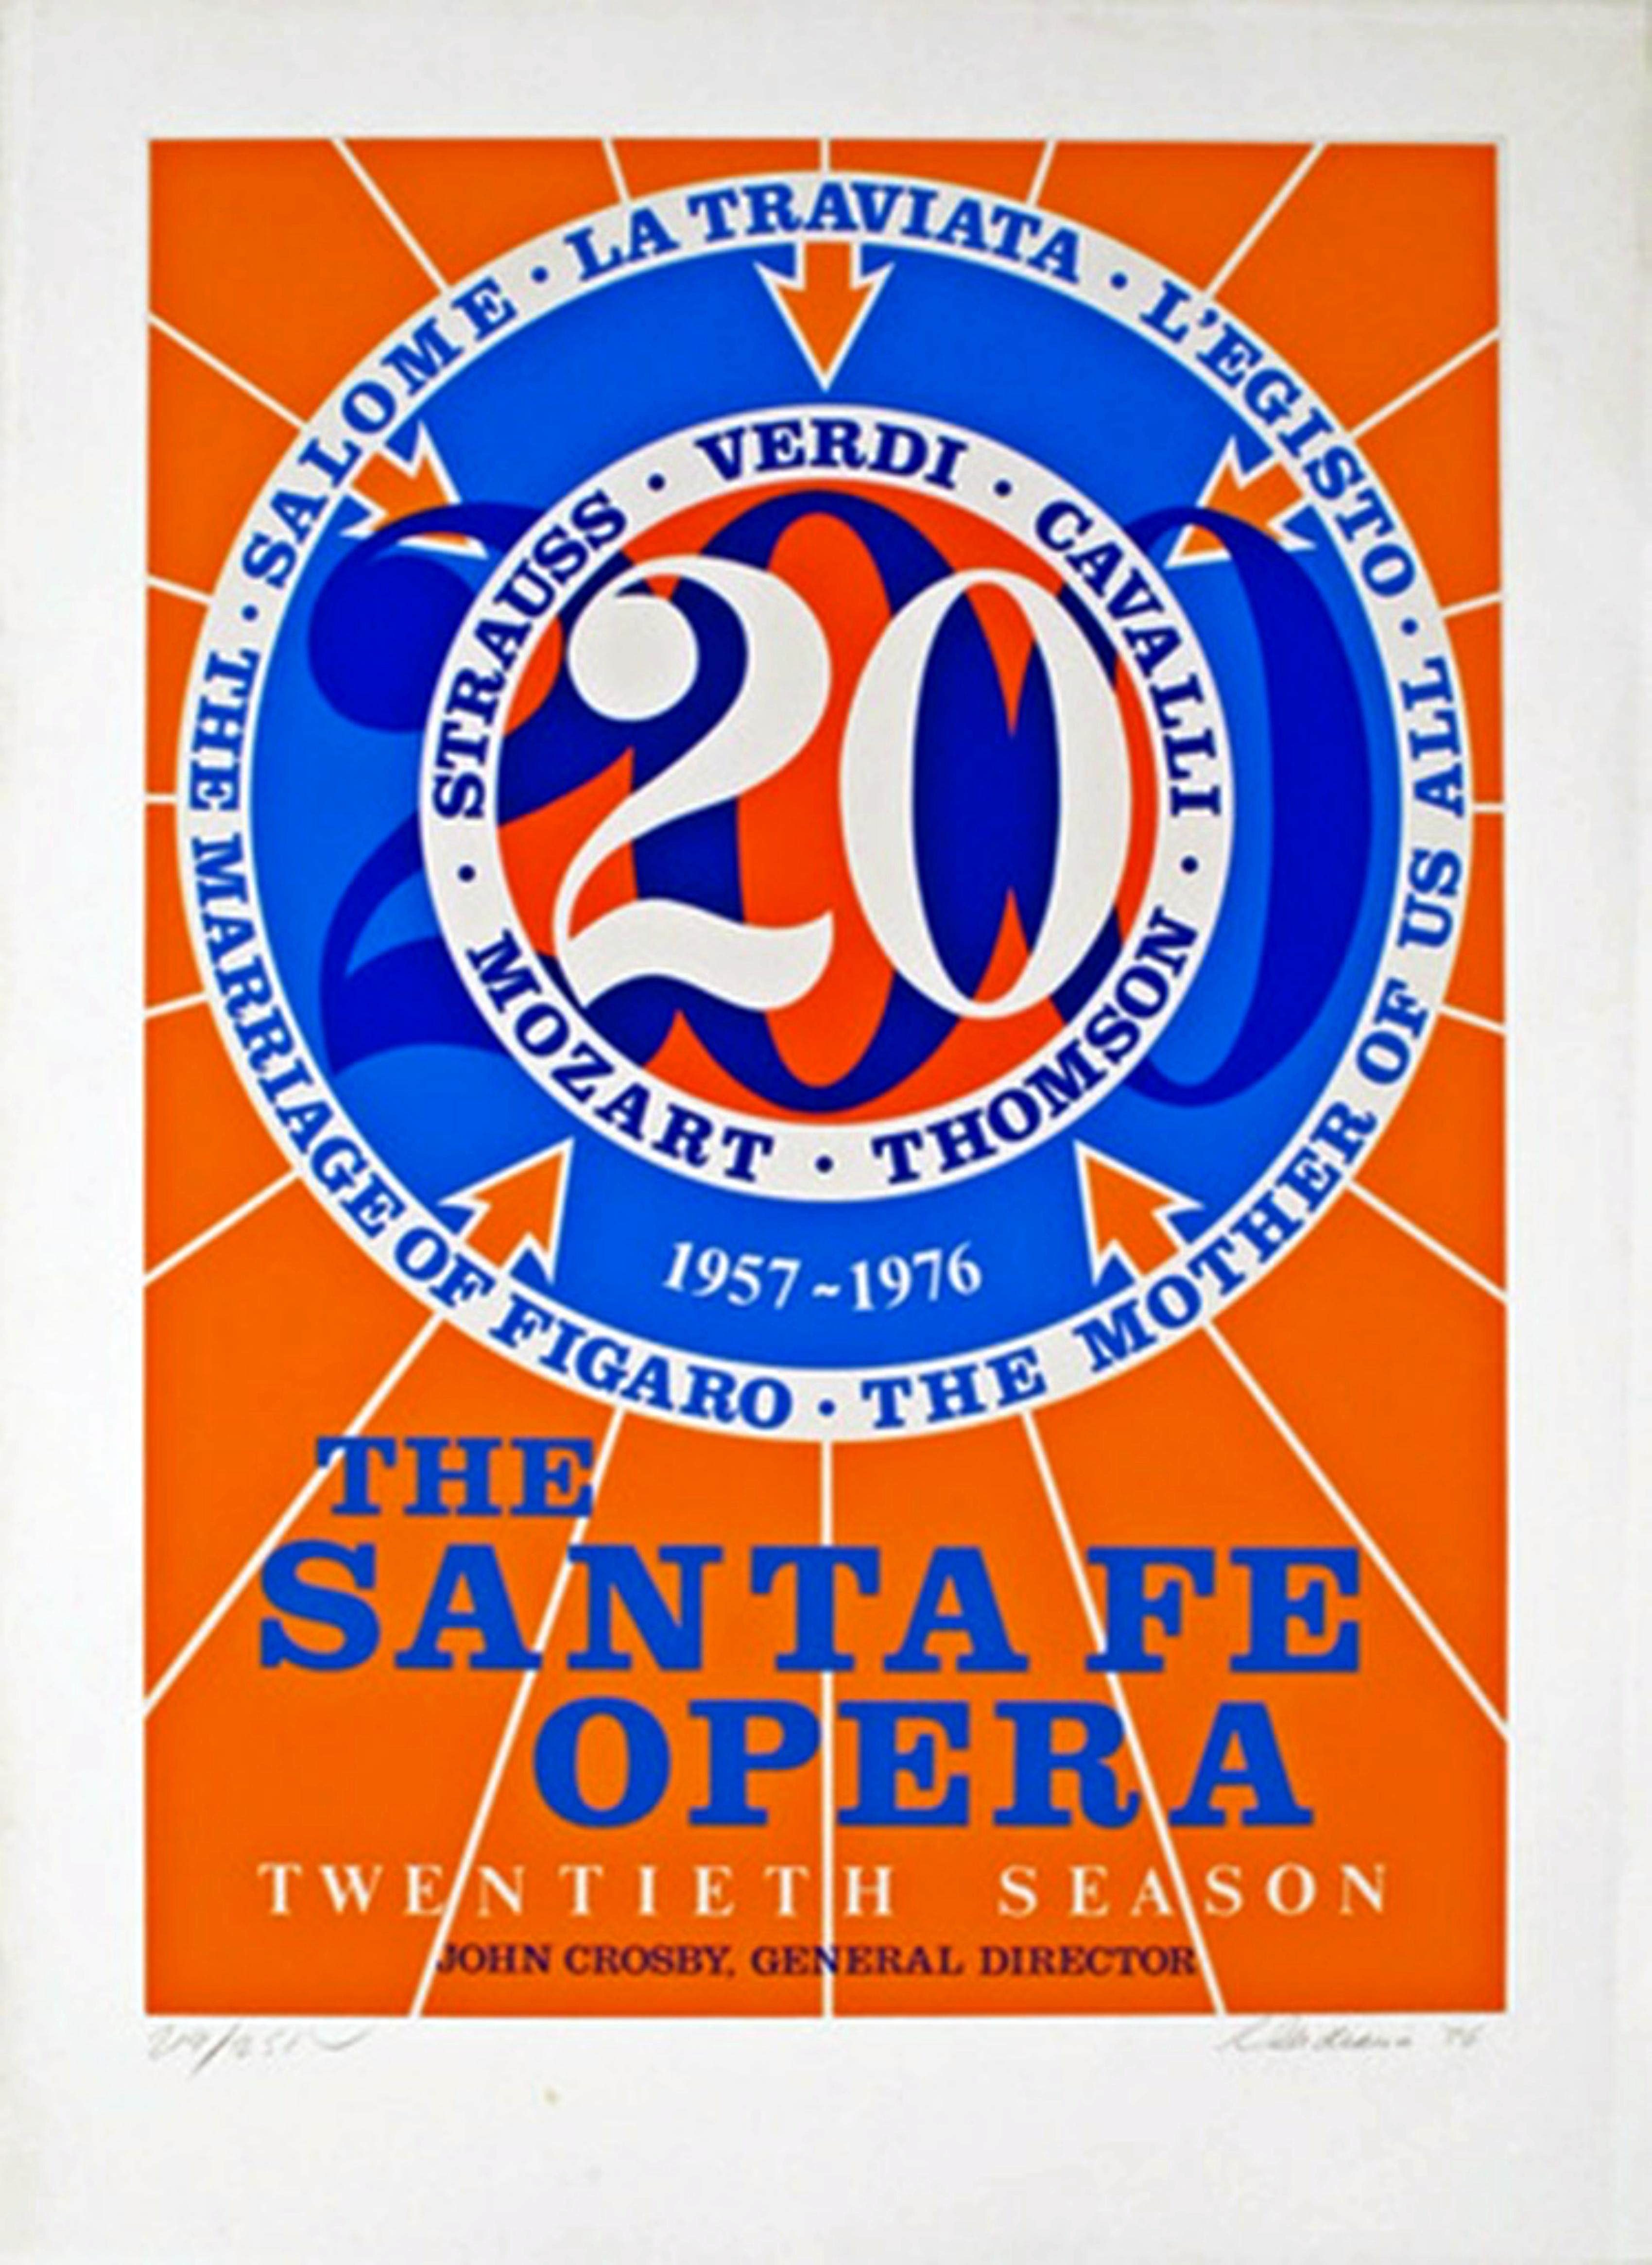 Santa Fe Opera (Deluxe VIP Edition; Hand Signed & Numbered AP Edition of 50)